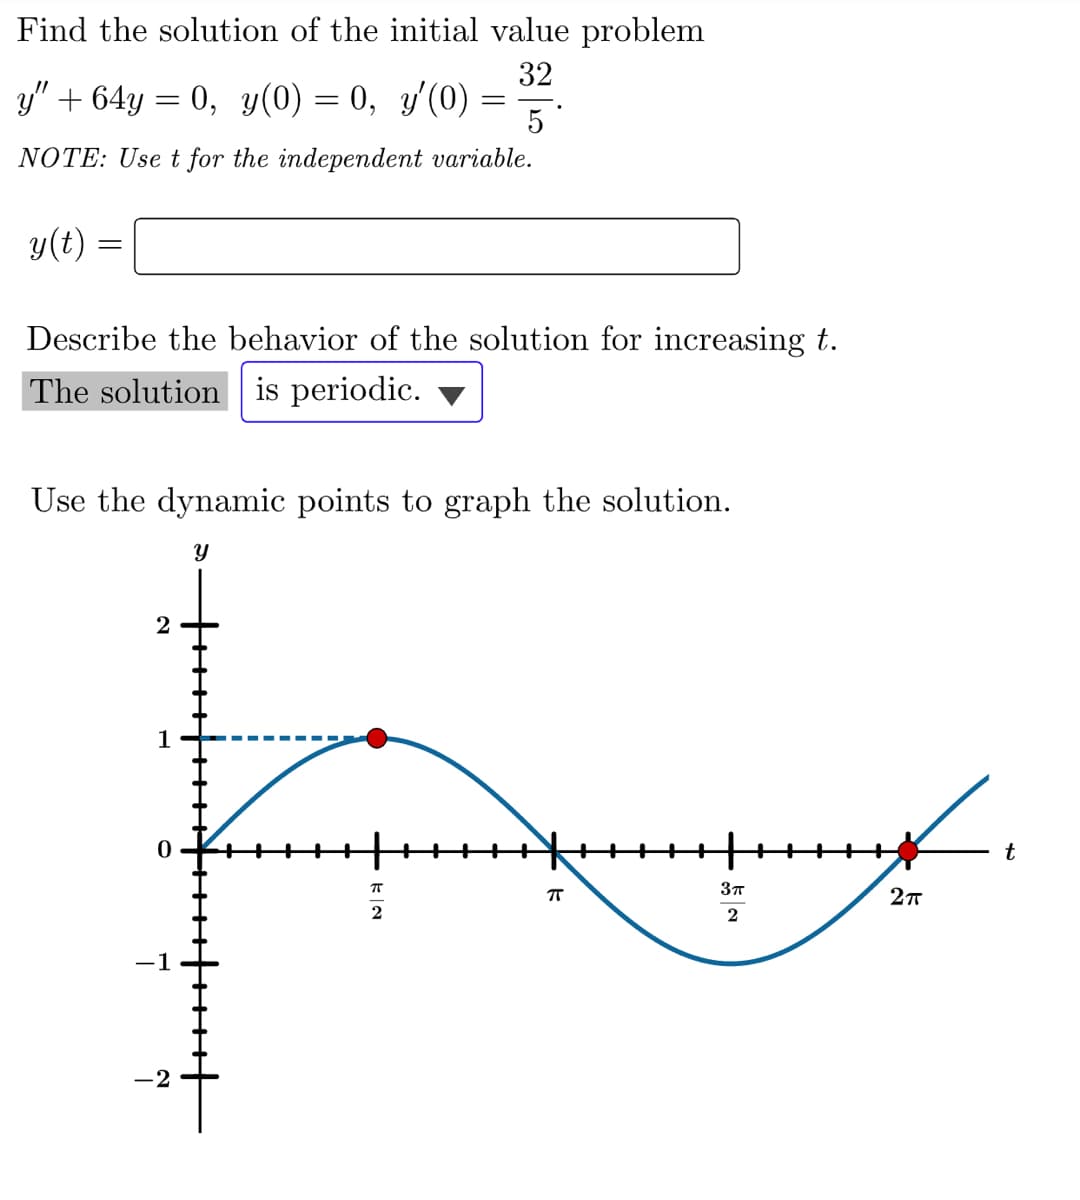 Find the solution of the initial value problem
32
y" + 64y = 0, y(0) = 0, y'(0)
NOTE: Use t for the independent variable.
y(t) =
=
Describe the behavior of the solution for increasing t.
The solution is periodic.
2
Use the dynamic points to graph the solution.
Y
7
-2
=
++f++++f
5*
ㅠ
2
π
3π
2
2π
t